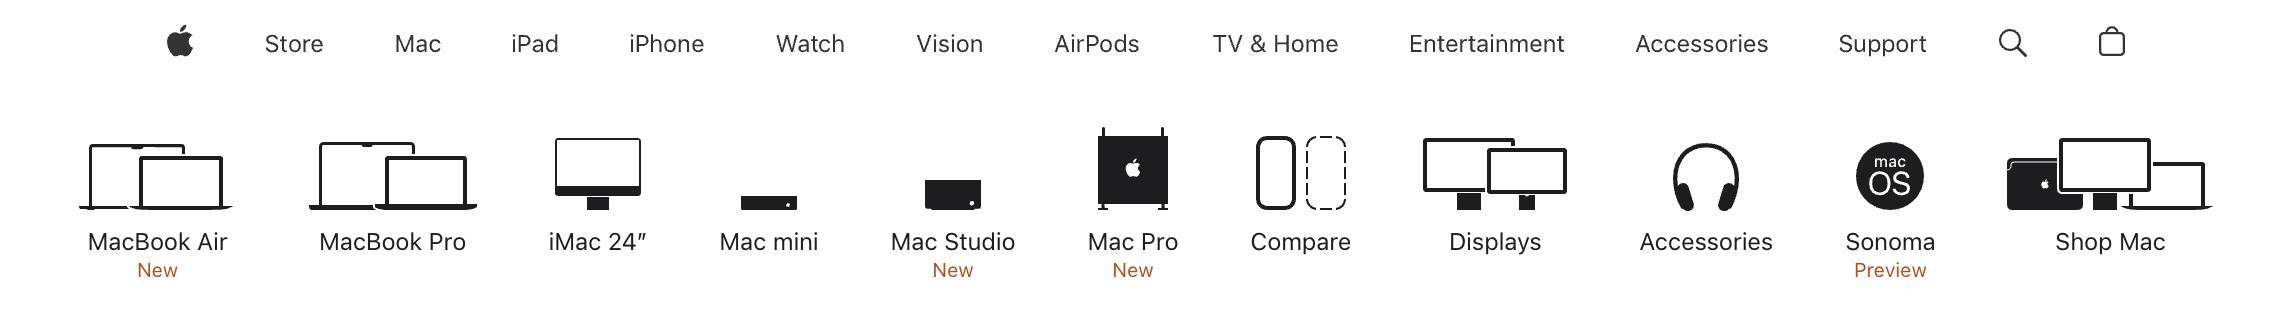 the top navigation menu on Apple's website which includes both links and icons